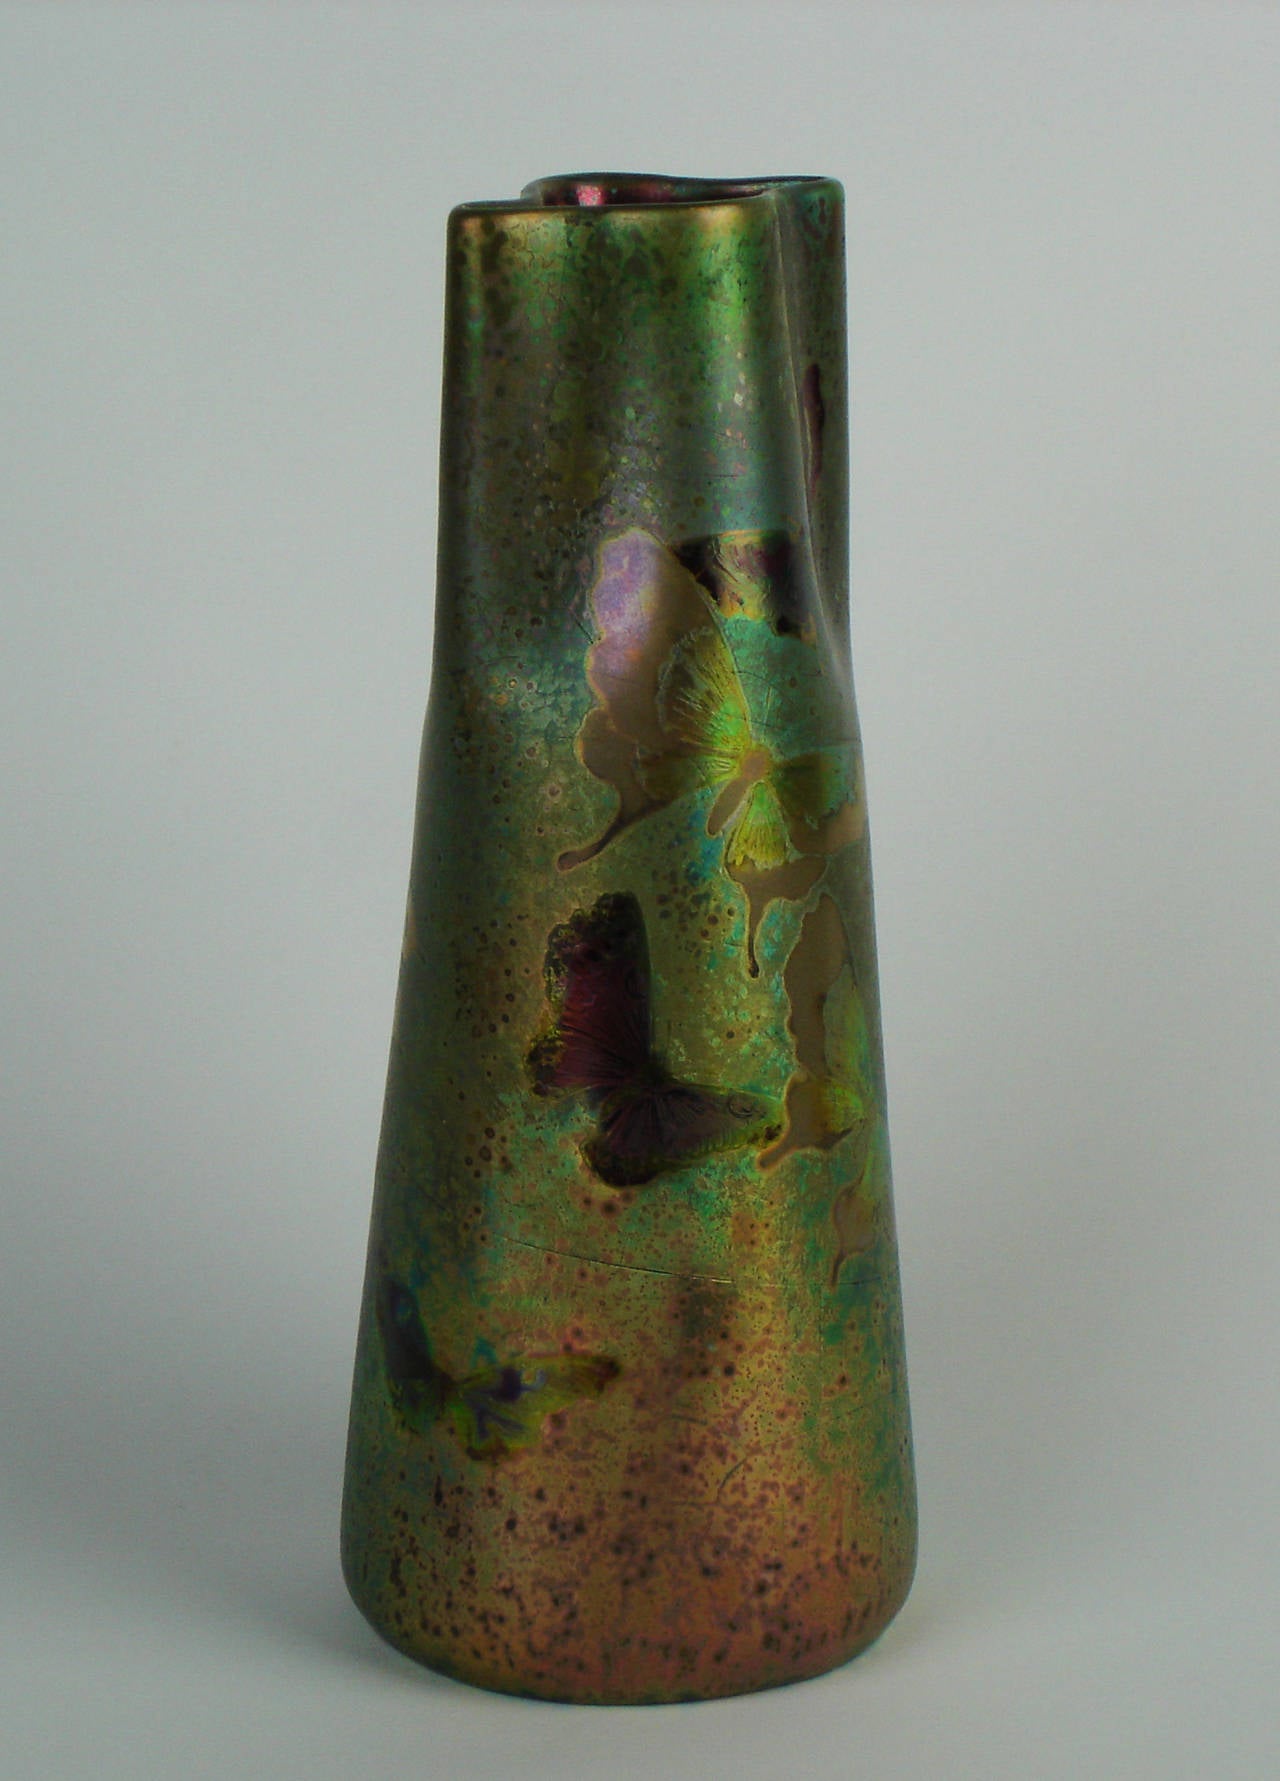 An Art Nouveau ceramic vase by Clement Massier with a luster varying from purple yellow and different shades of green presenting a festive decoration of multicolored twirling butterflies on a greenery background. Signed Clement Massier, Golfe Juan.